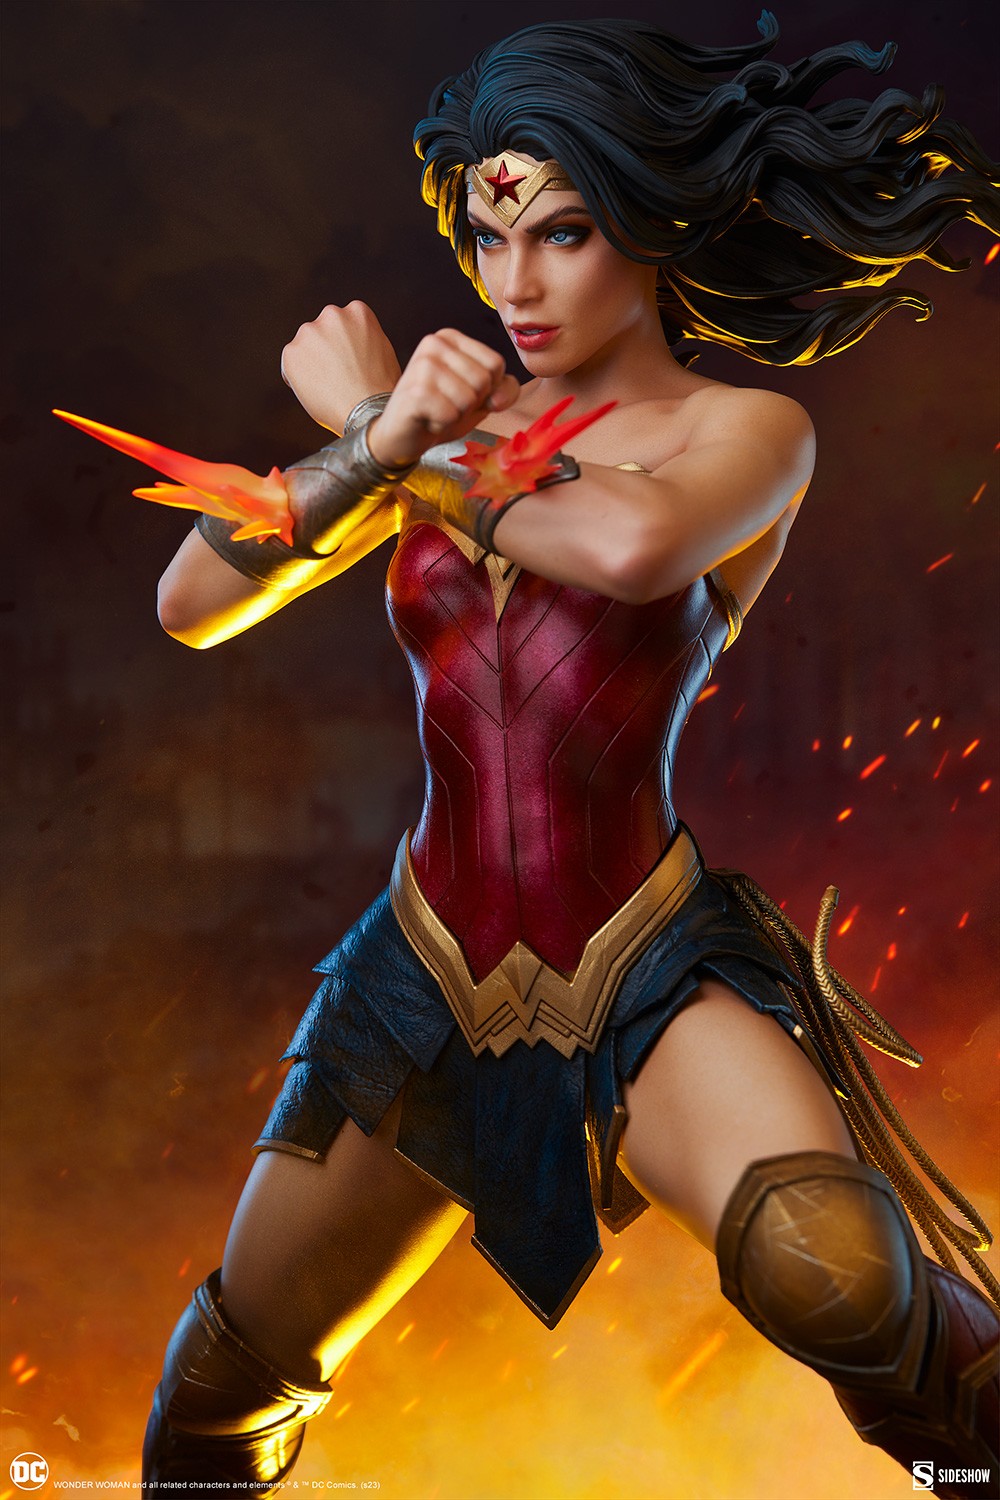 Wonder Woman: Saving the Day Premium Format Figure by Sideshow